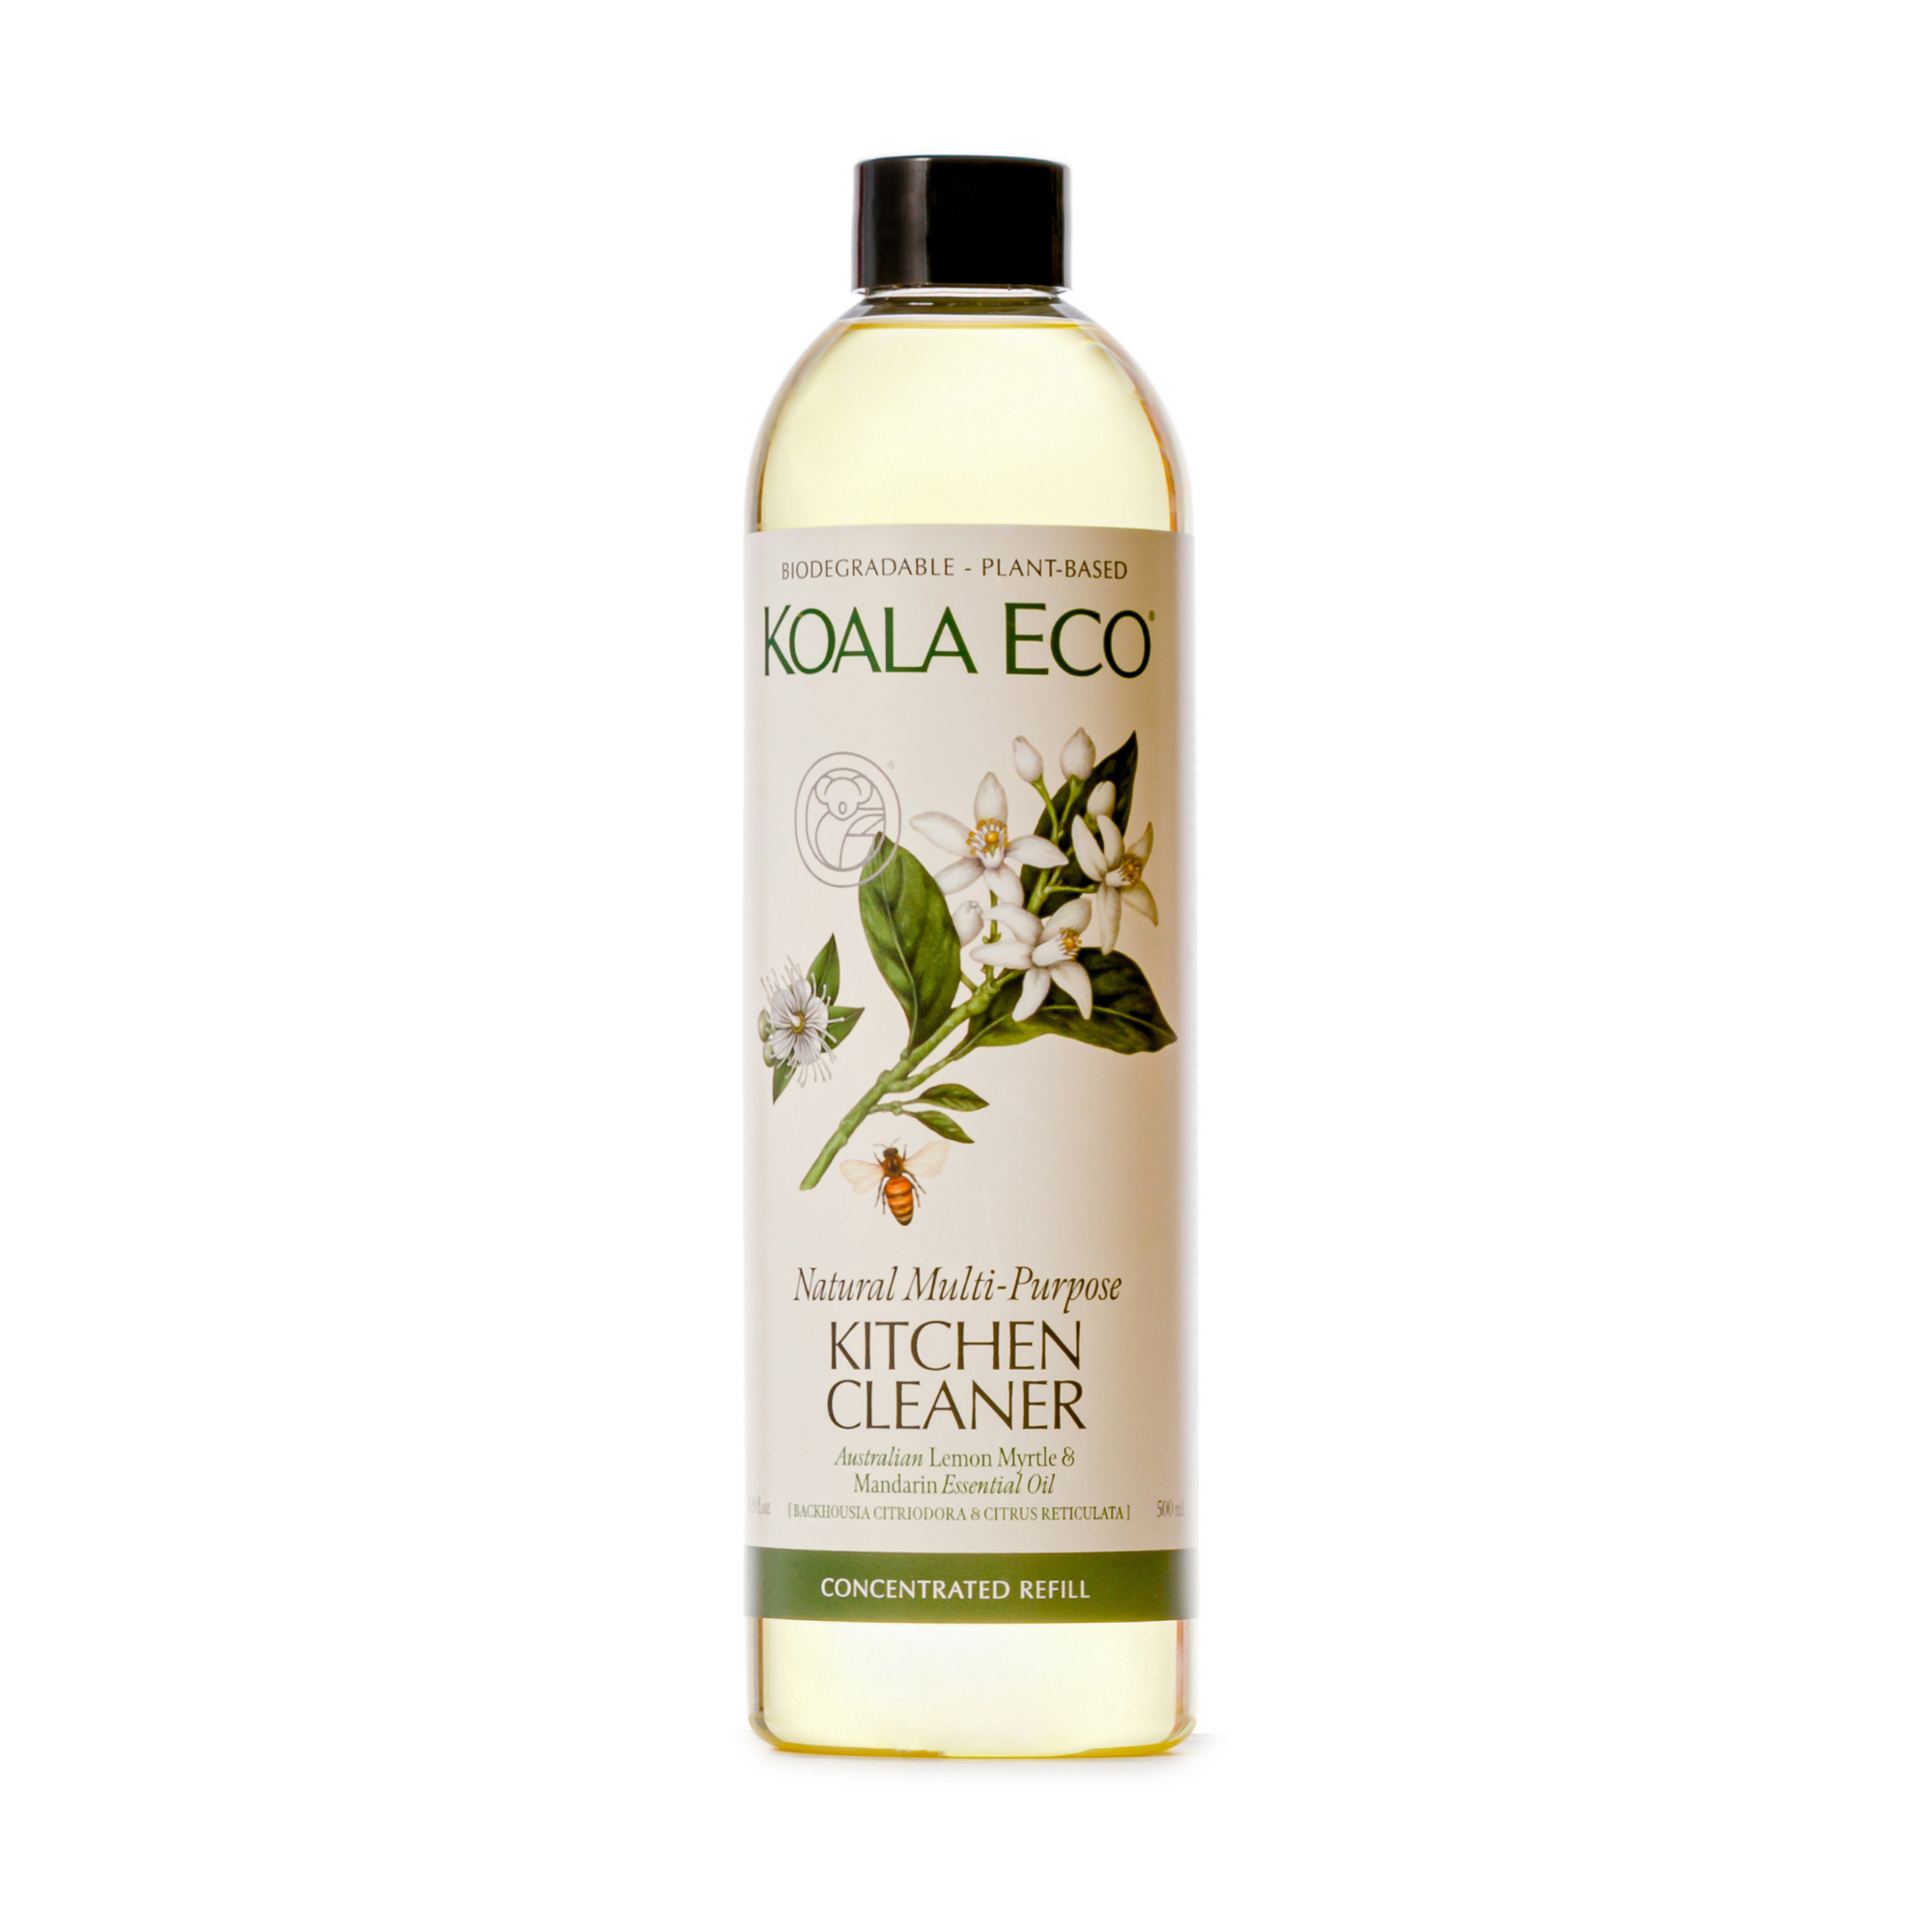 Koala Eco Natural Multi-Purpose Kitchen Cleaner - Concentrated Refill (500ml)